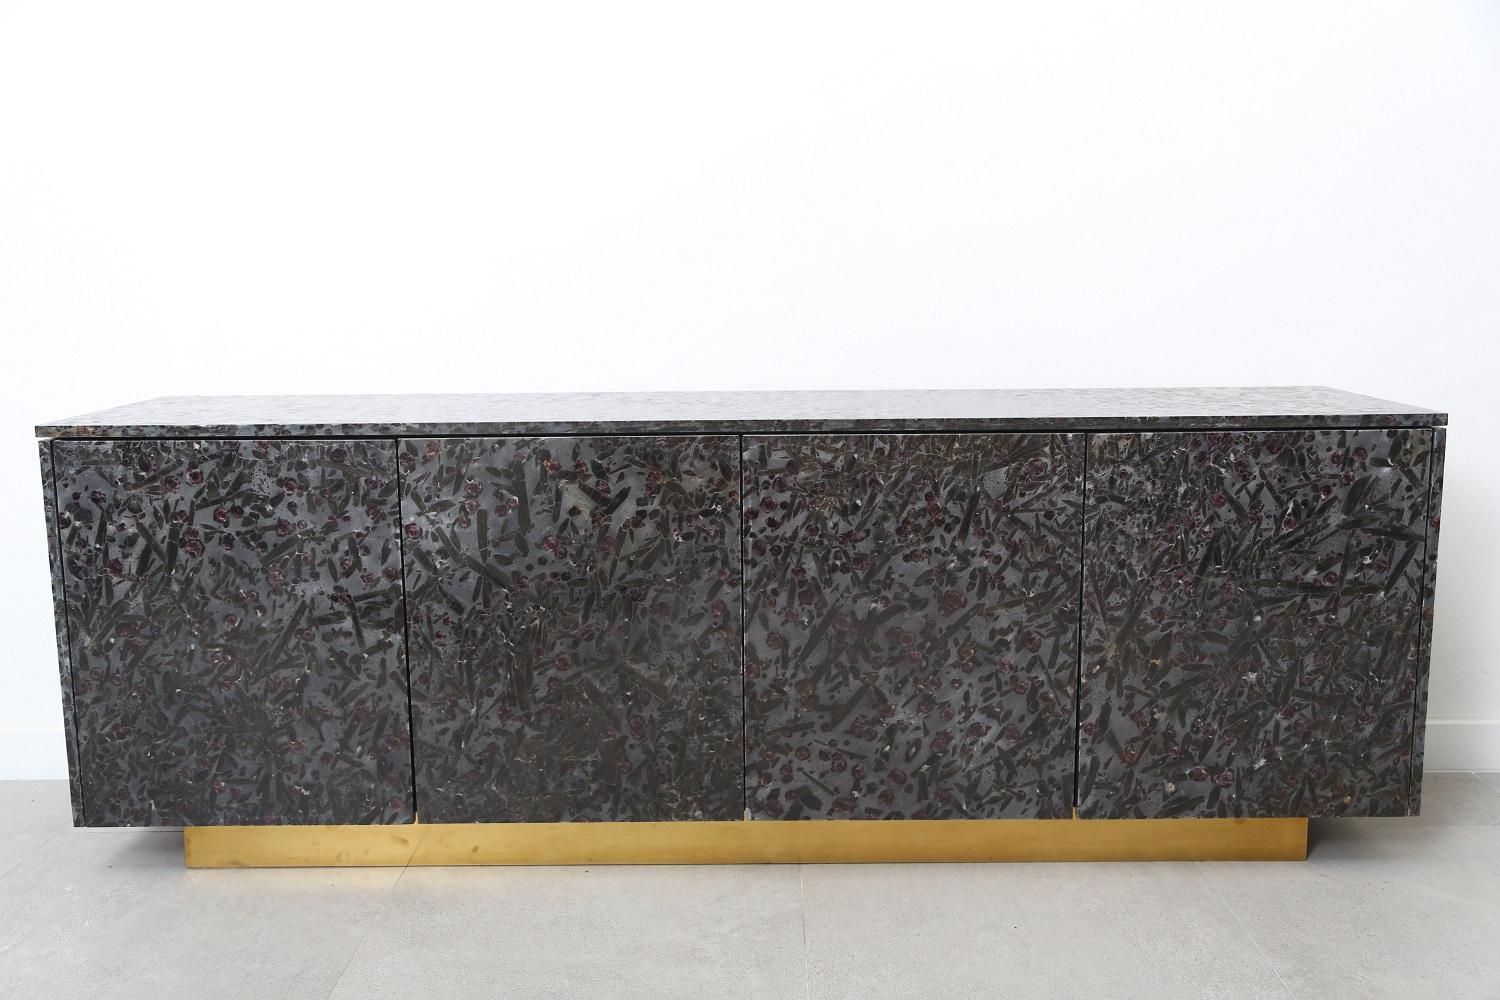 Four-door console made of Meteurus granite. The Meteurus granite is a stunning exotic granite from Brazil. The background made of silver black crystals grains it’s embellished by black biotite. What makes this granite extraordinary beautiful is the